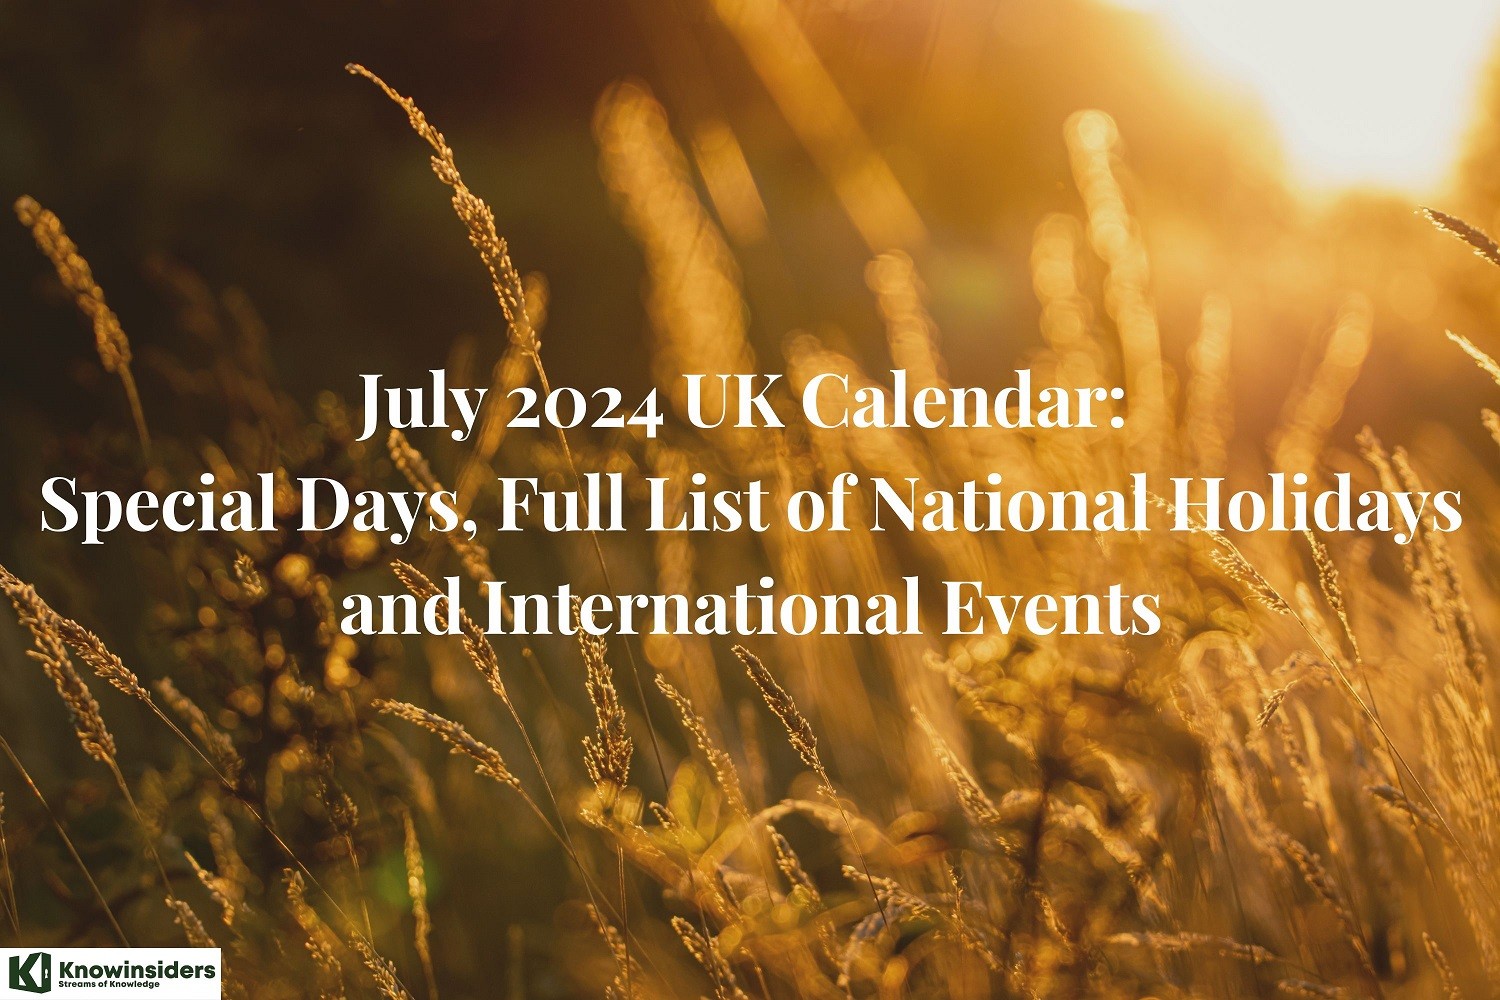 July 2024 UK Calendar: Special Days, Full List of National Holidays and International Events